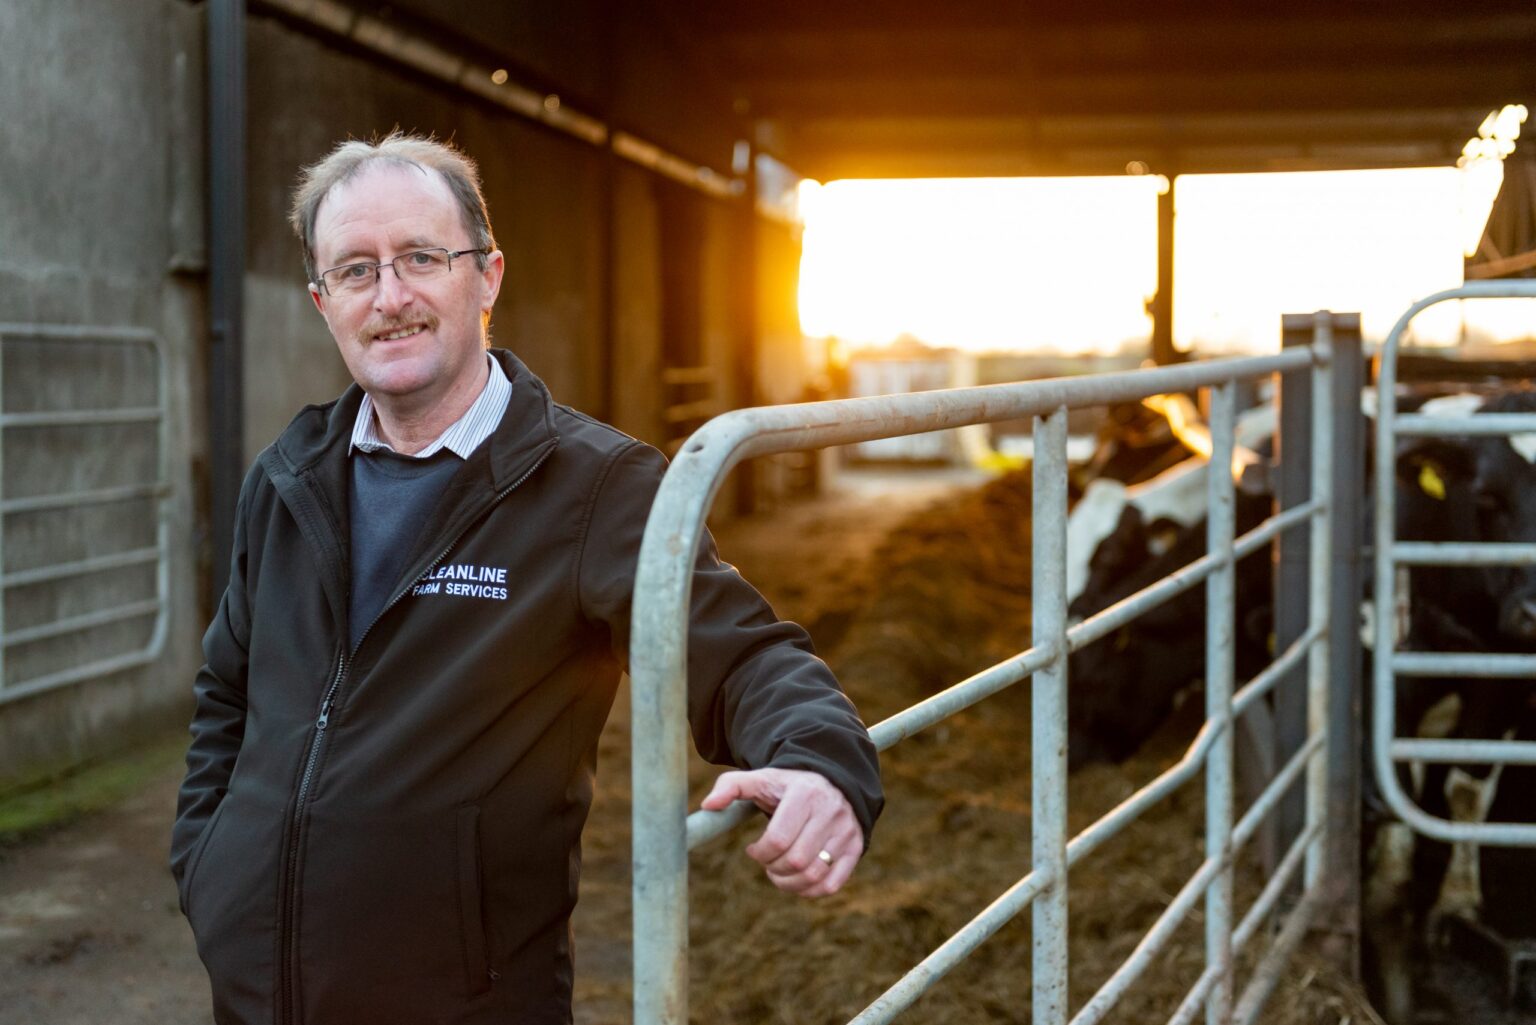 Cleanline Farm Services is your Agri Store near by for dairy farmers based in Ireland and the UK. We offer dairy hygiene, calf & dairy health products, and on-farm dairy services. You can find our agri store in Tipperary Town, Co. Tipperary. Through our online agri store you can easily order online 24/7.